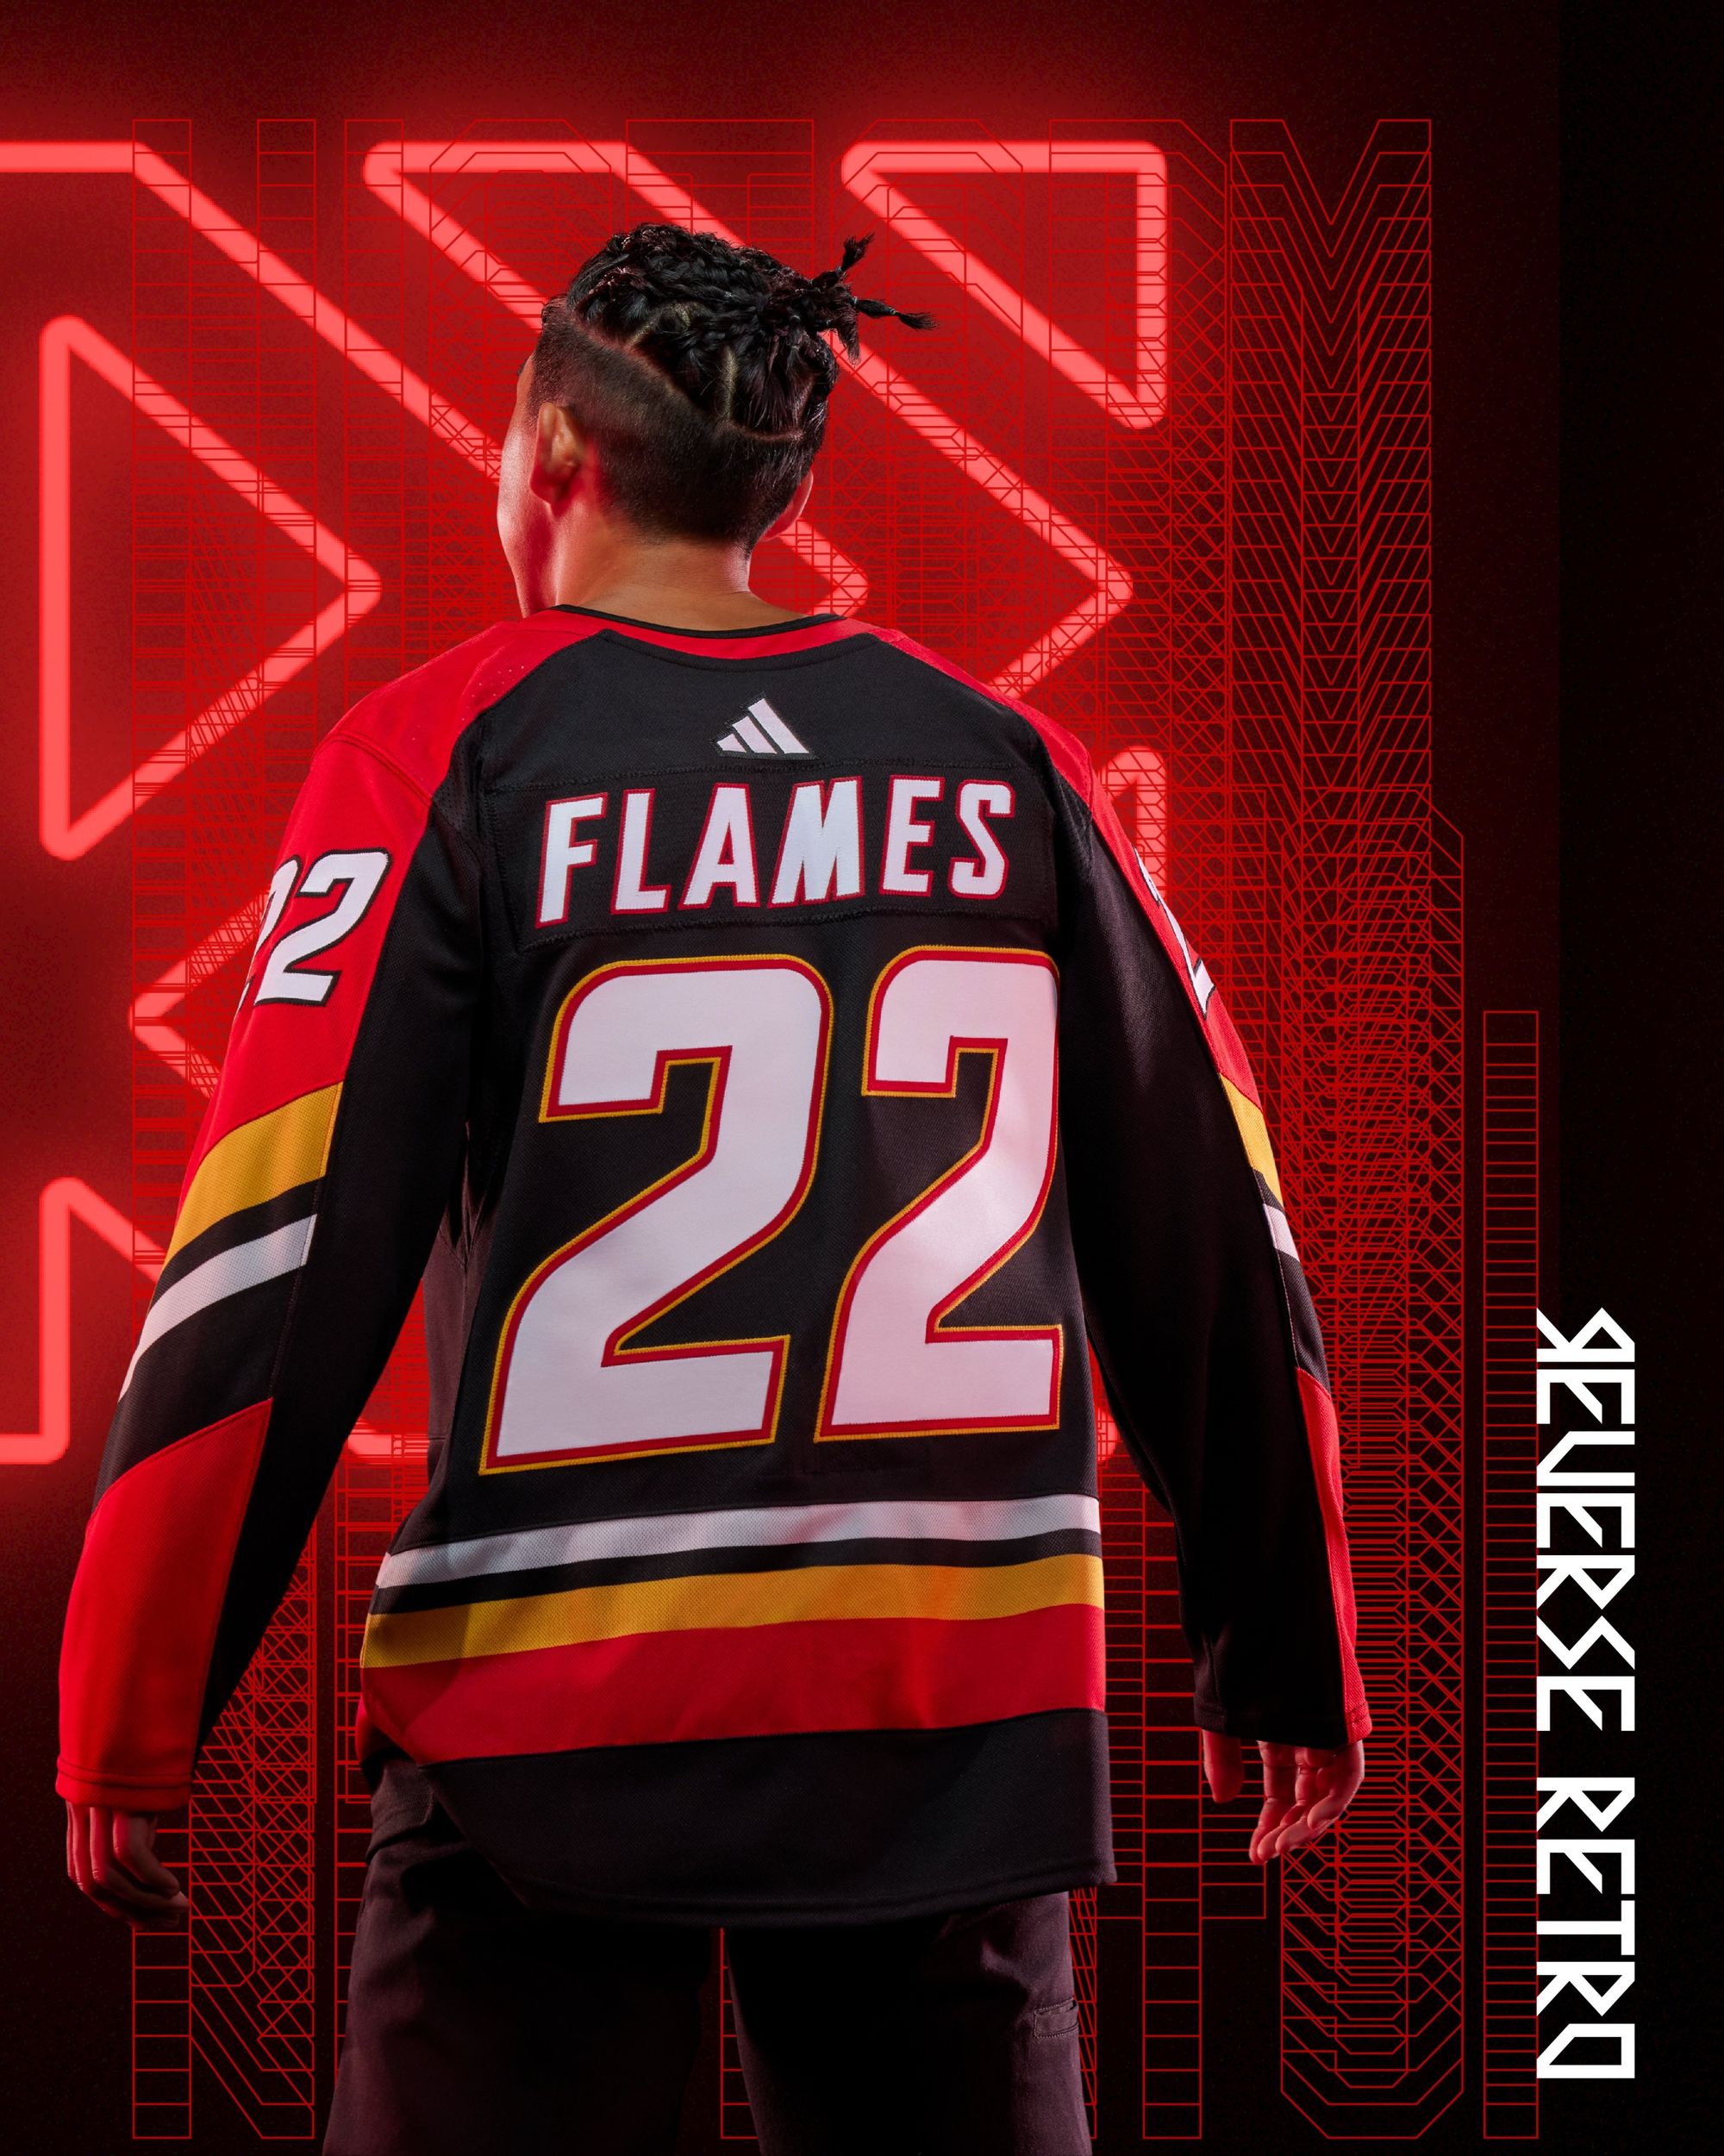 First reactions to the Flames new reverse retro jersey aren't great